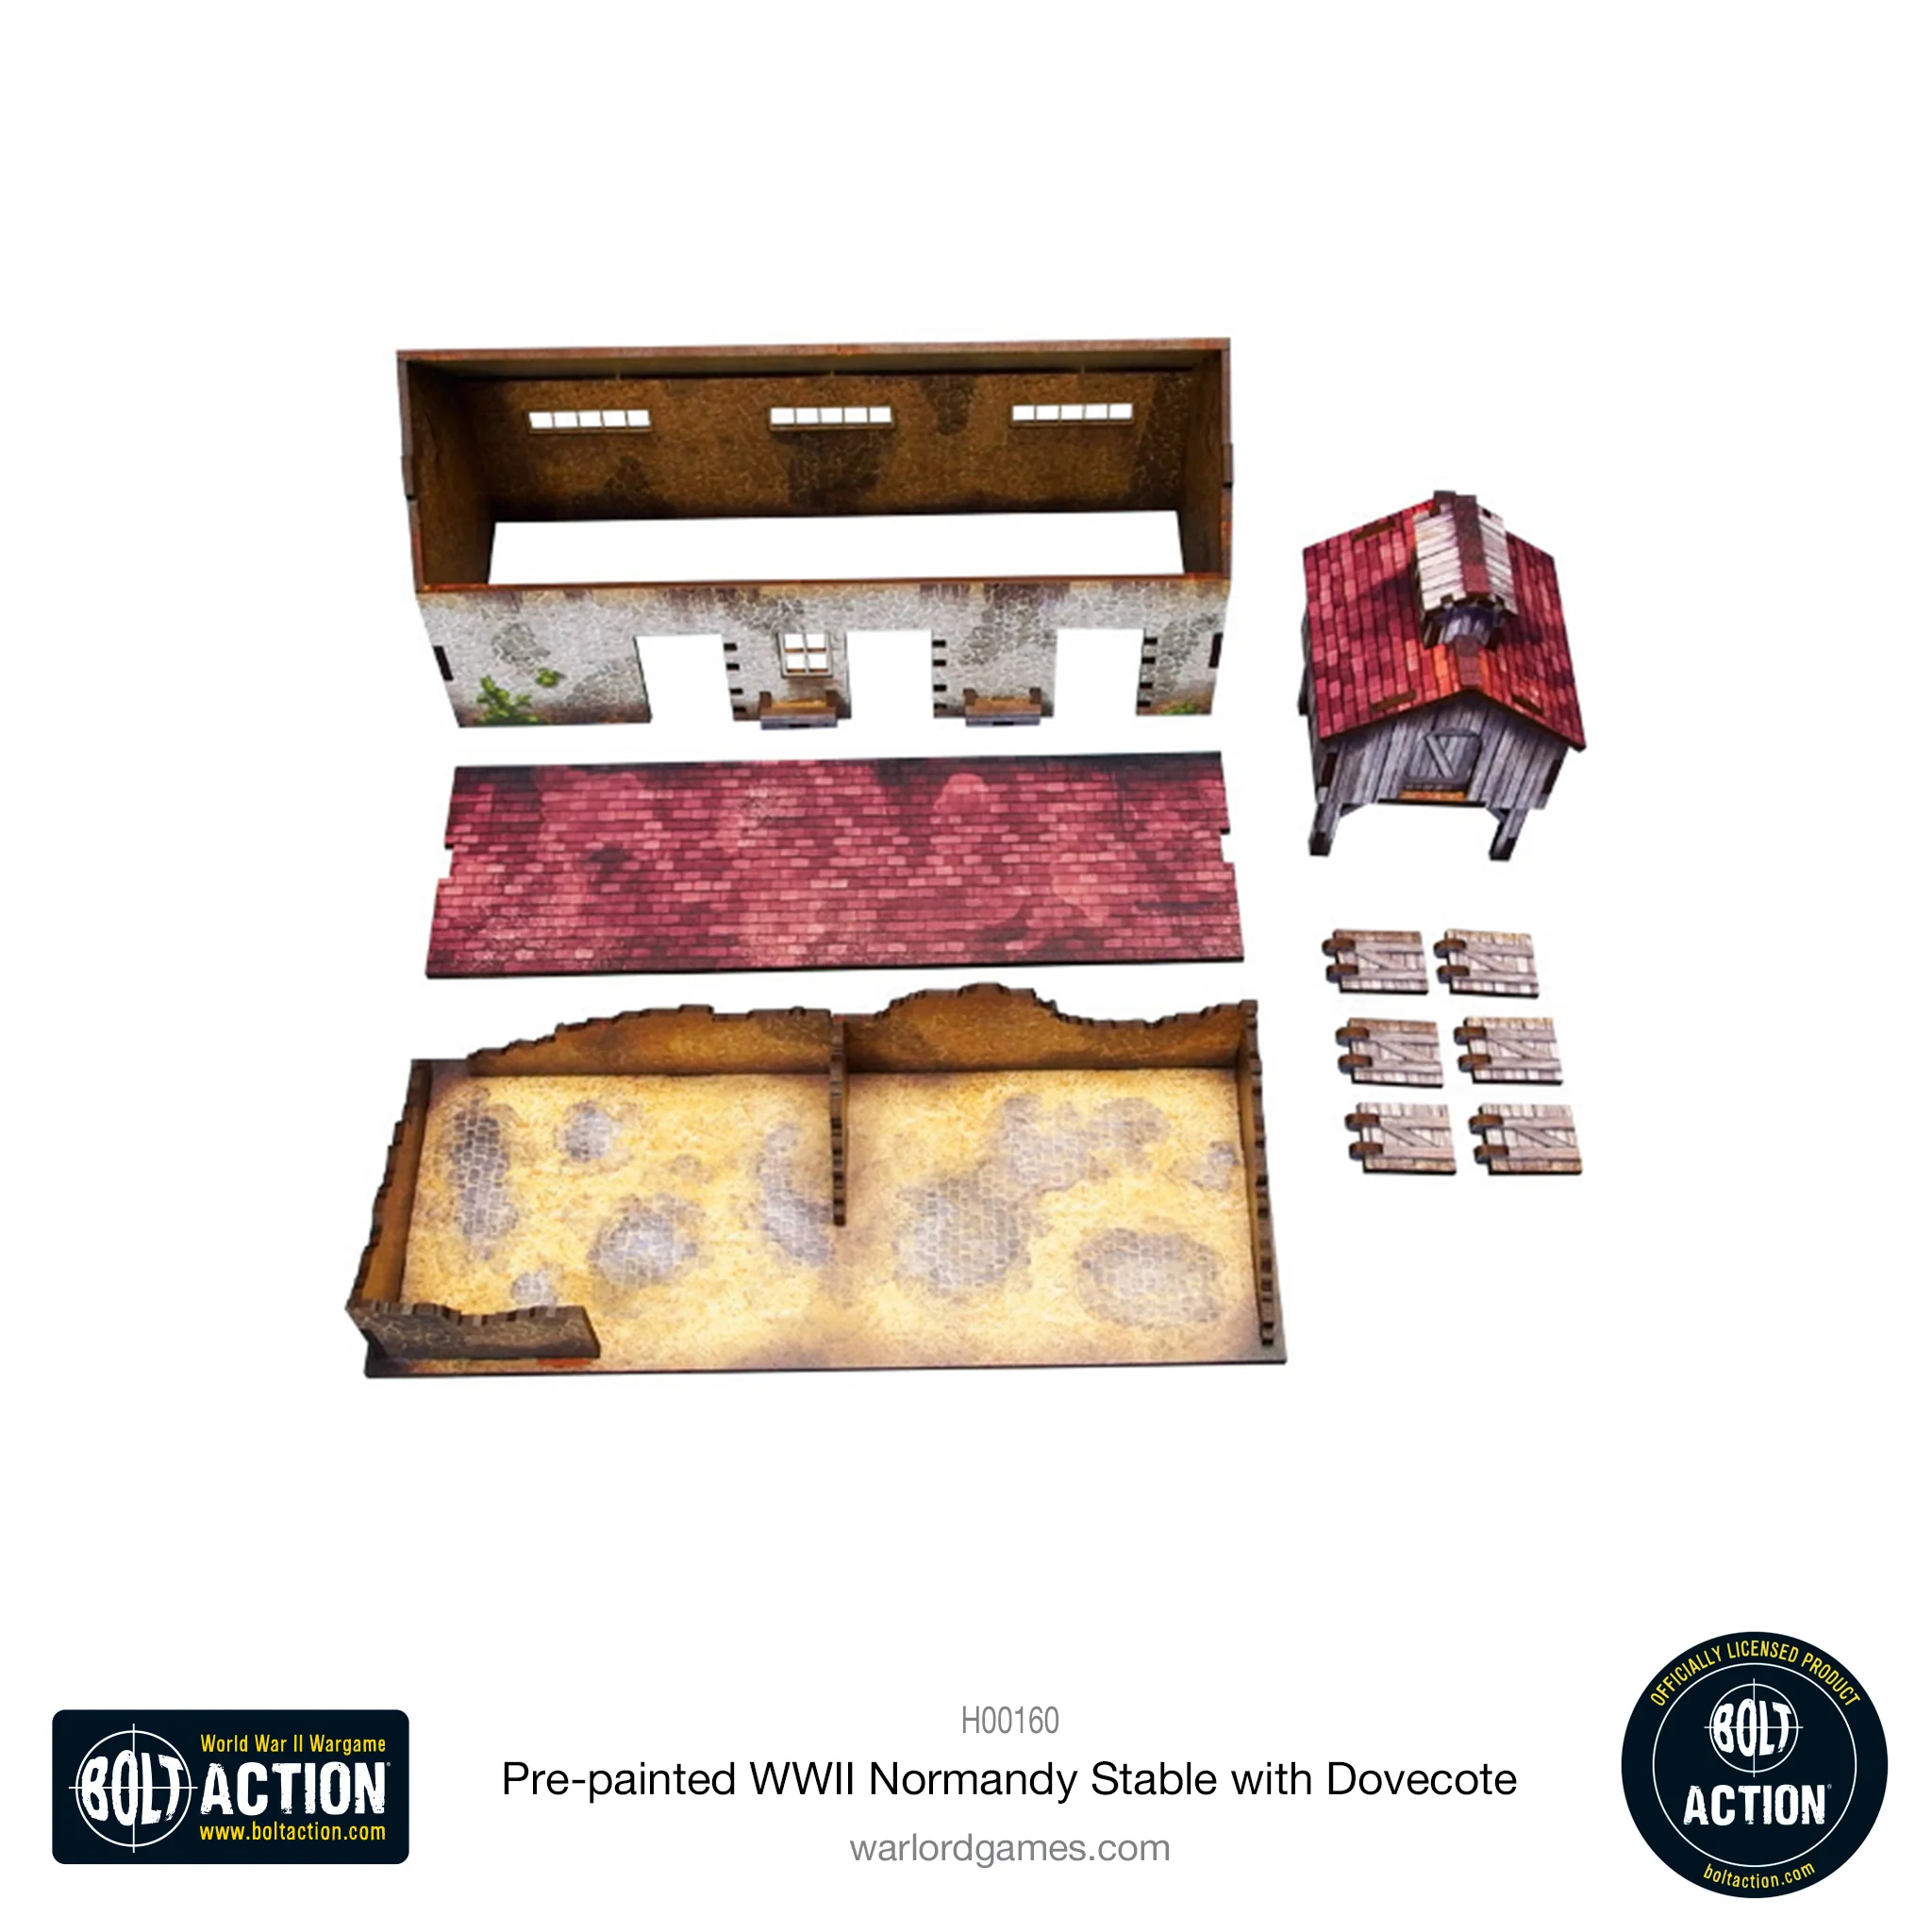 Bolt Action: Pre-Painted WWII Normandy Stable With Dovecote-1711116377-EDzY5.webp